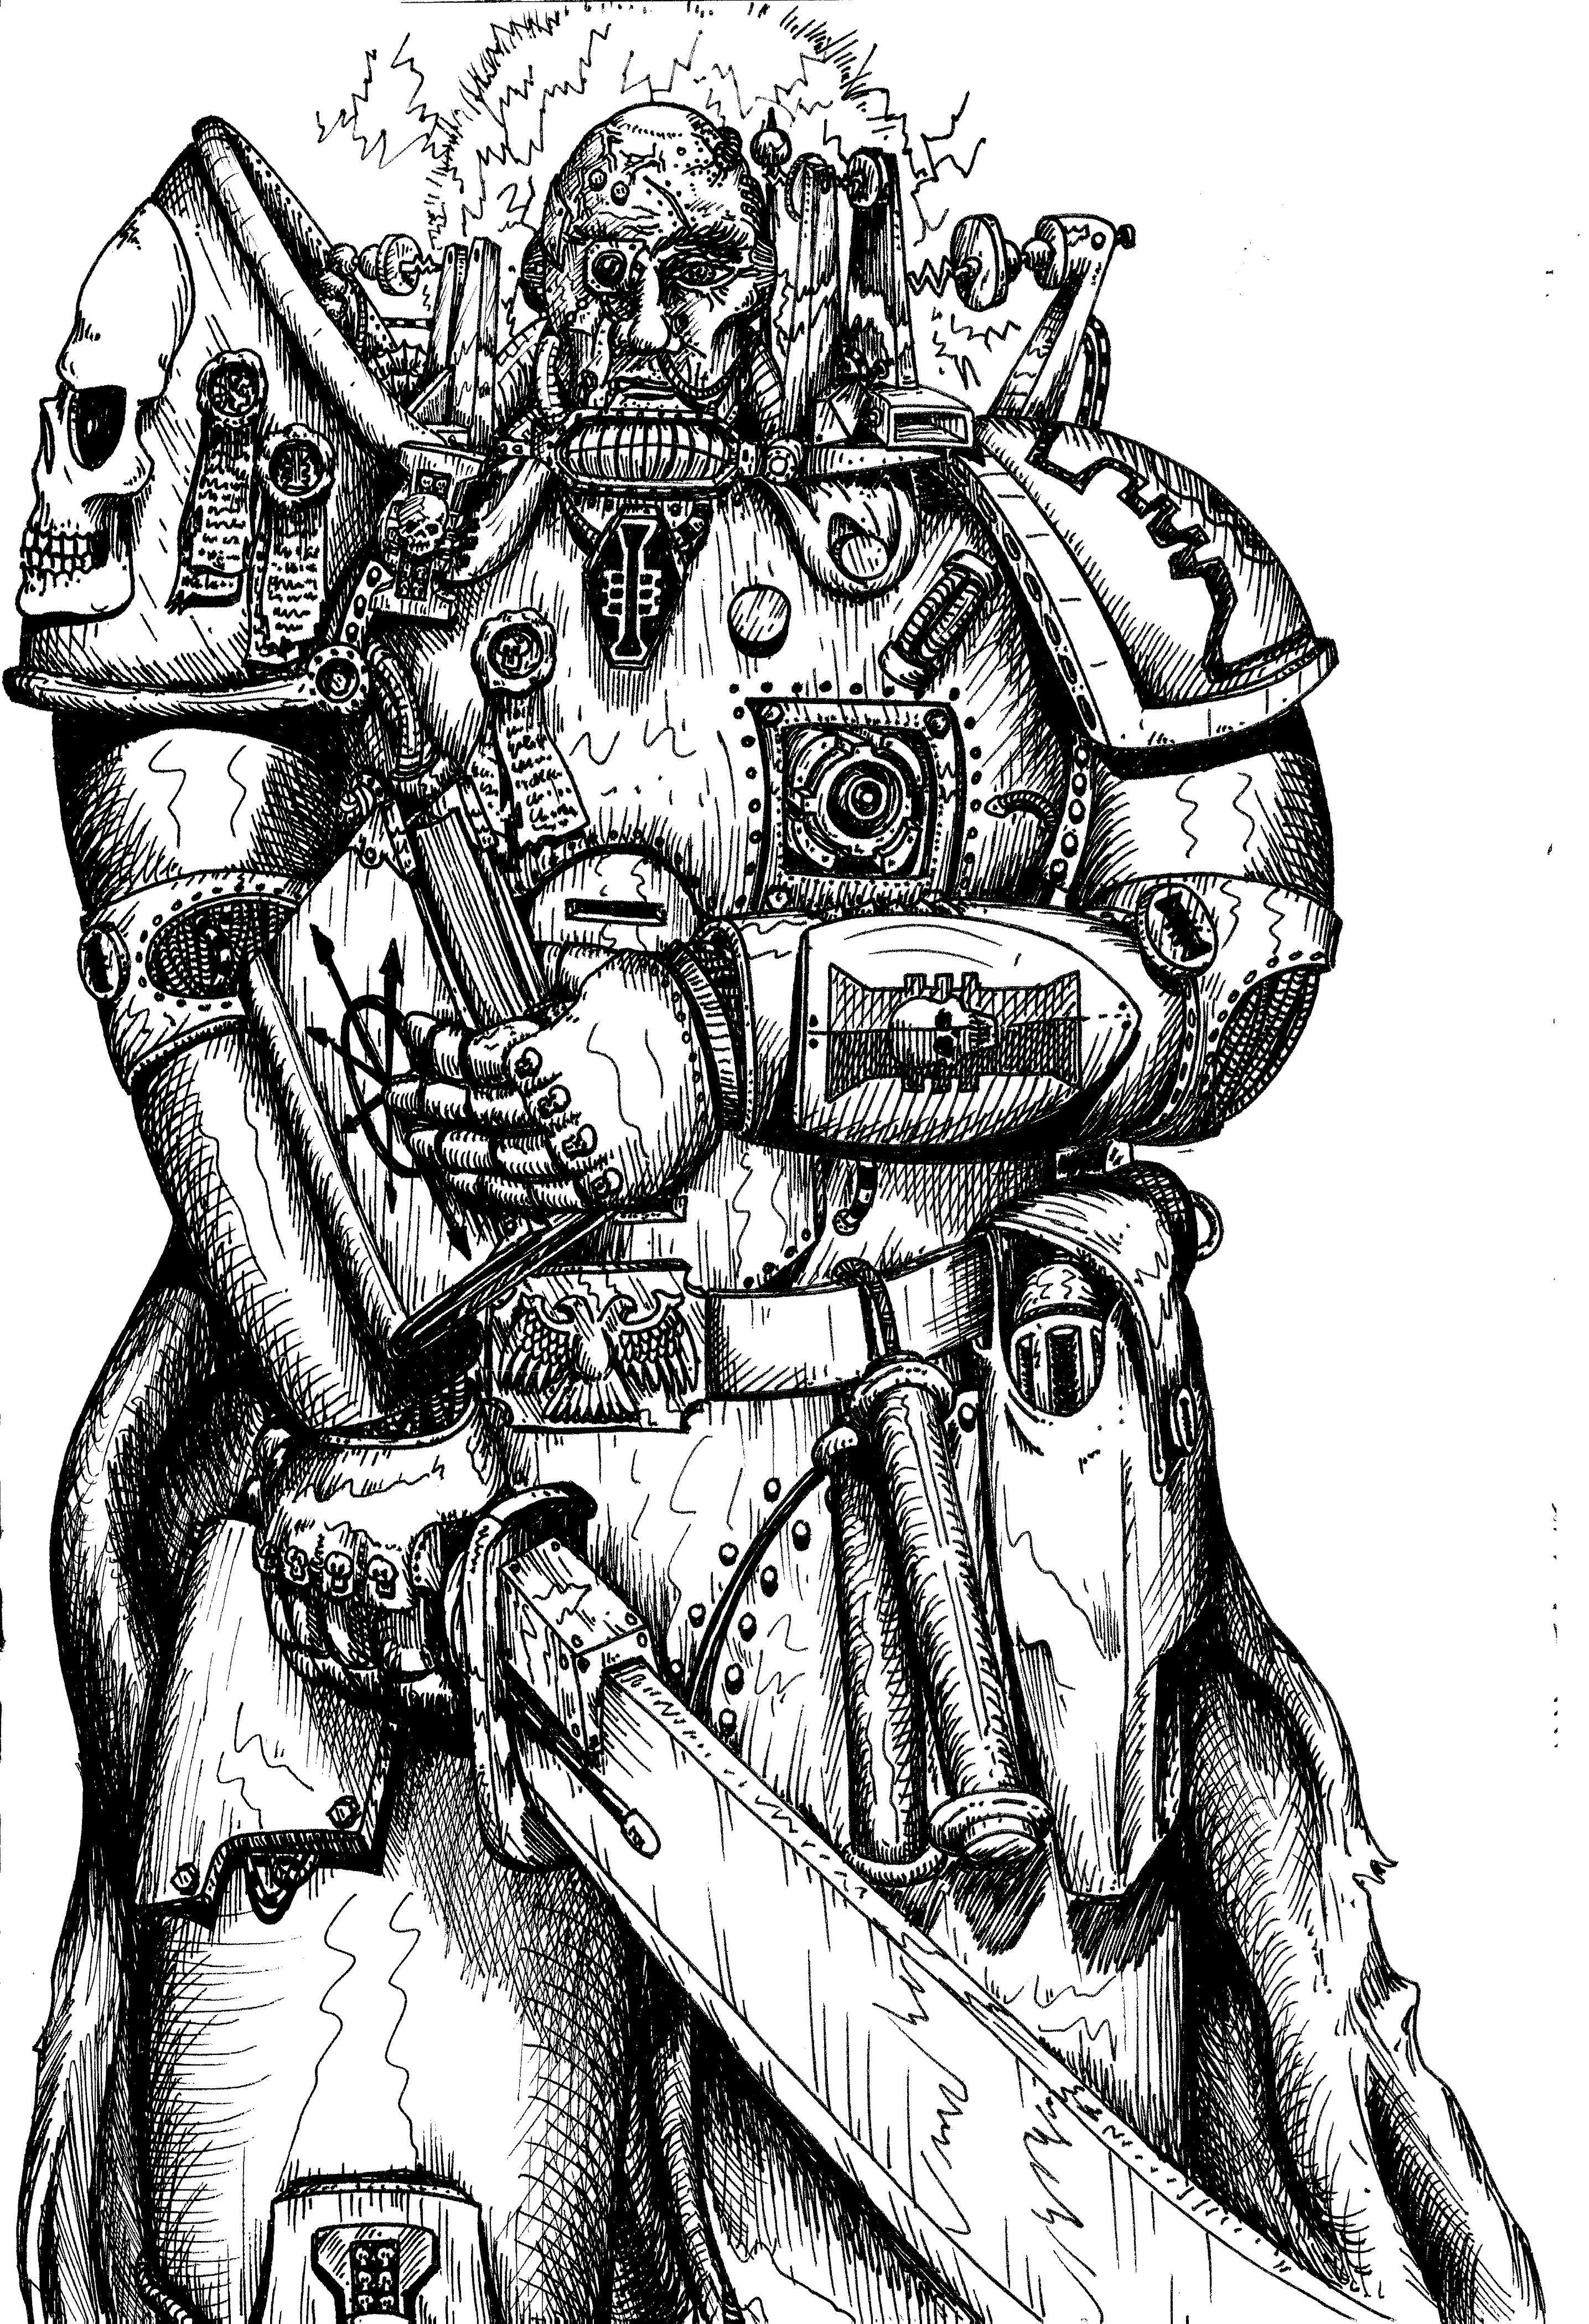 80´s, Artwork, Big, Chaos, Chaos Space Marines, Crazy, Daemons, Drawing, Drawings, Dreadnought, First Edition, Old, Old Style, School, Scratch, Scratch Build, Space Marines, Style, Ugly